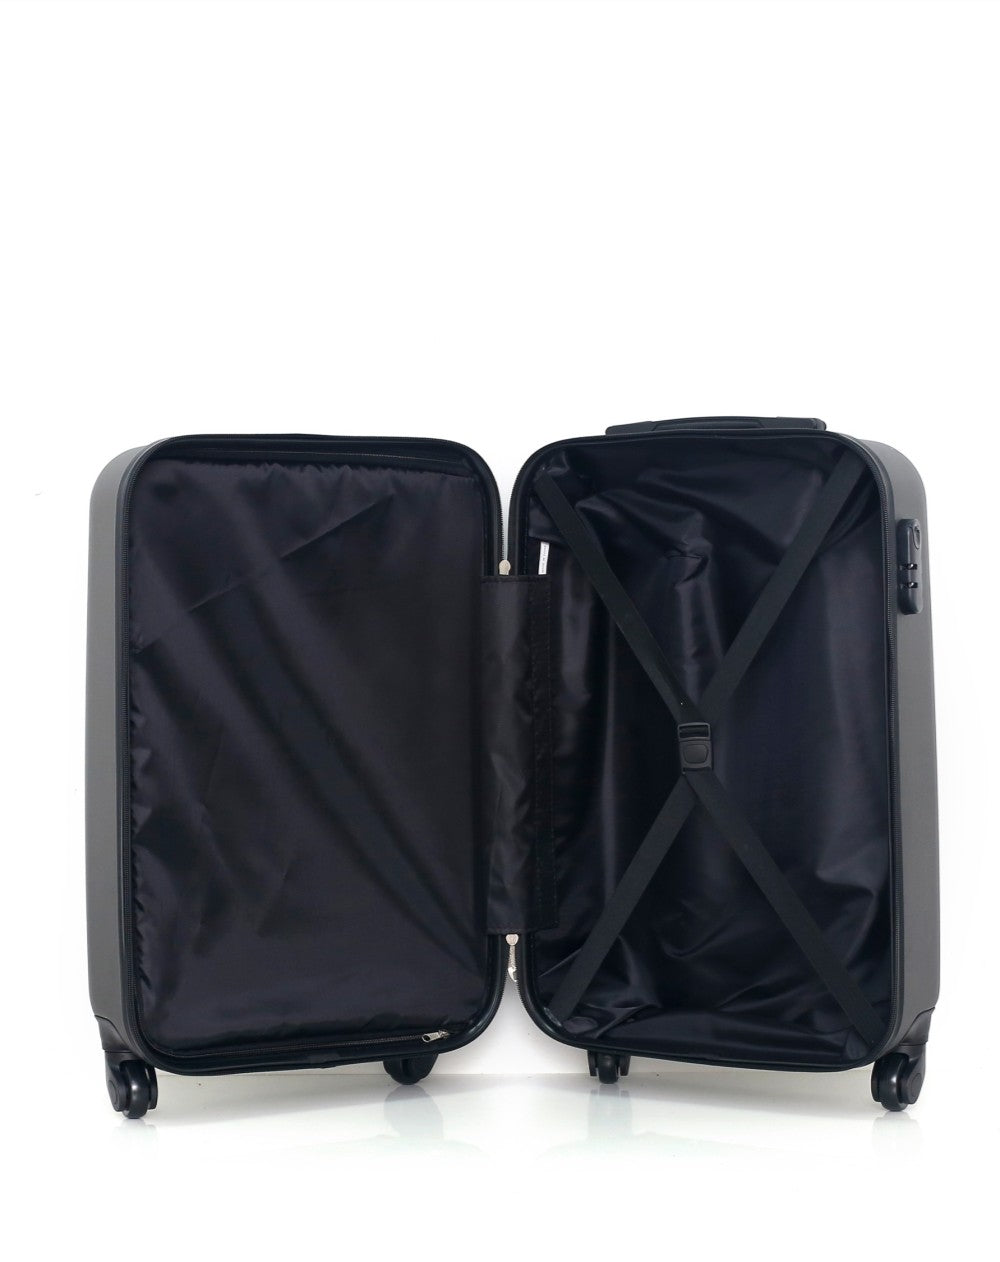 Valise Weekend ABS SPRINGFIELD-A 4 Roues 60 cm